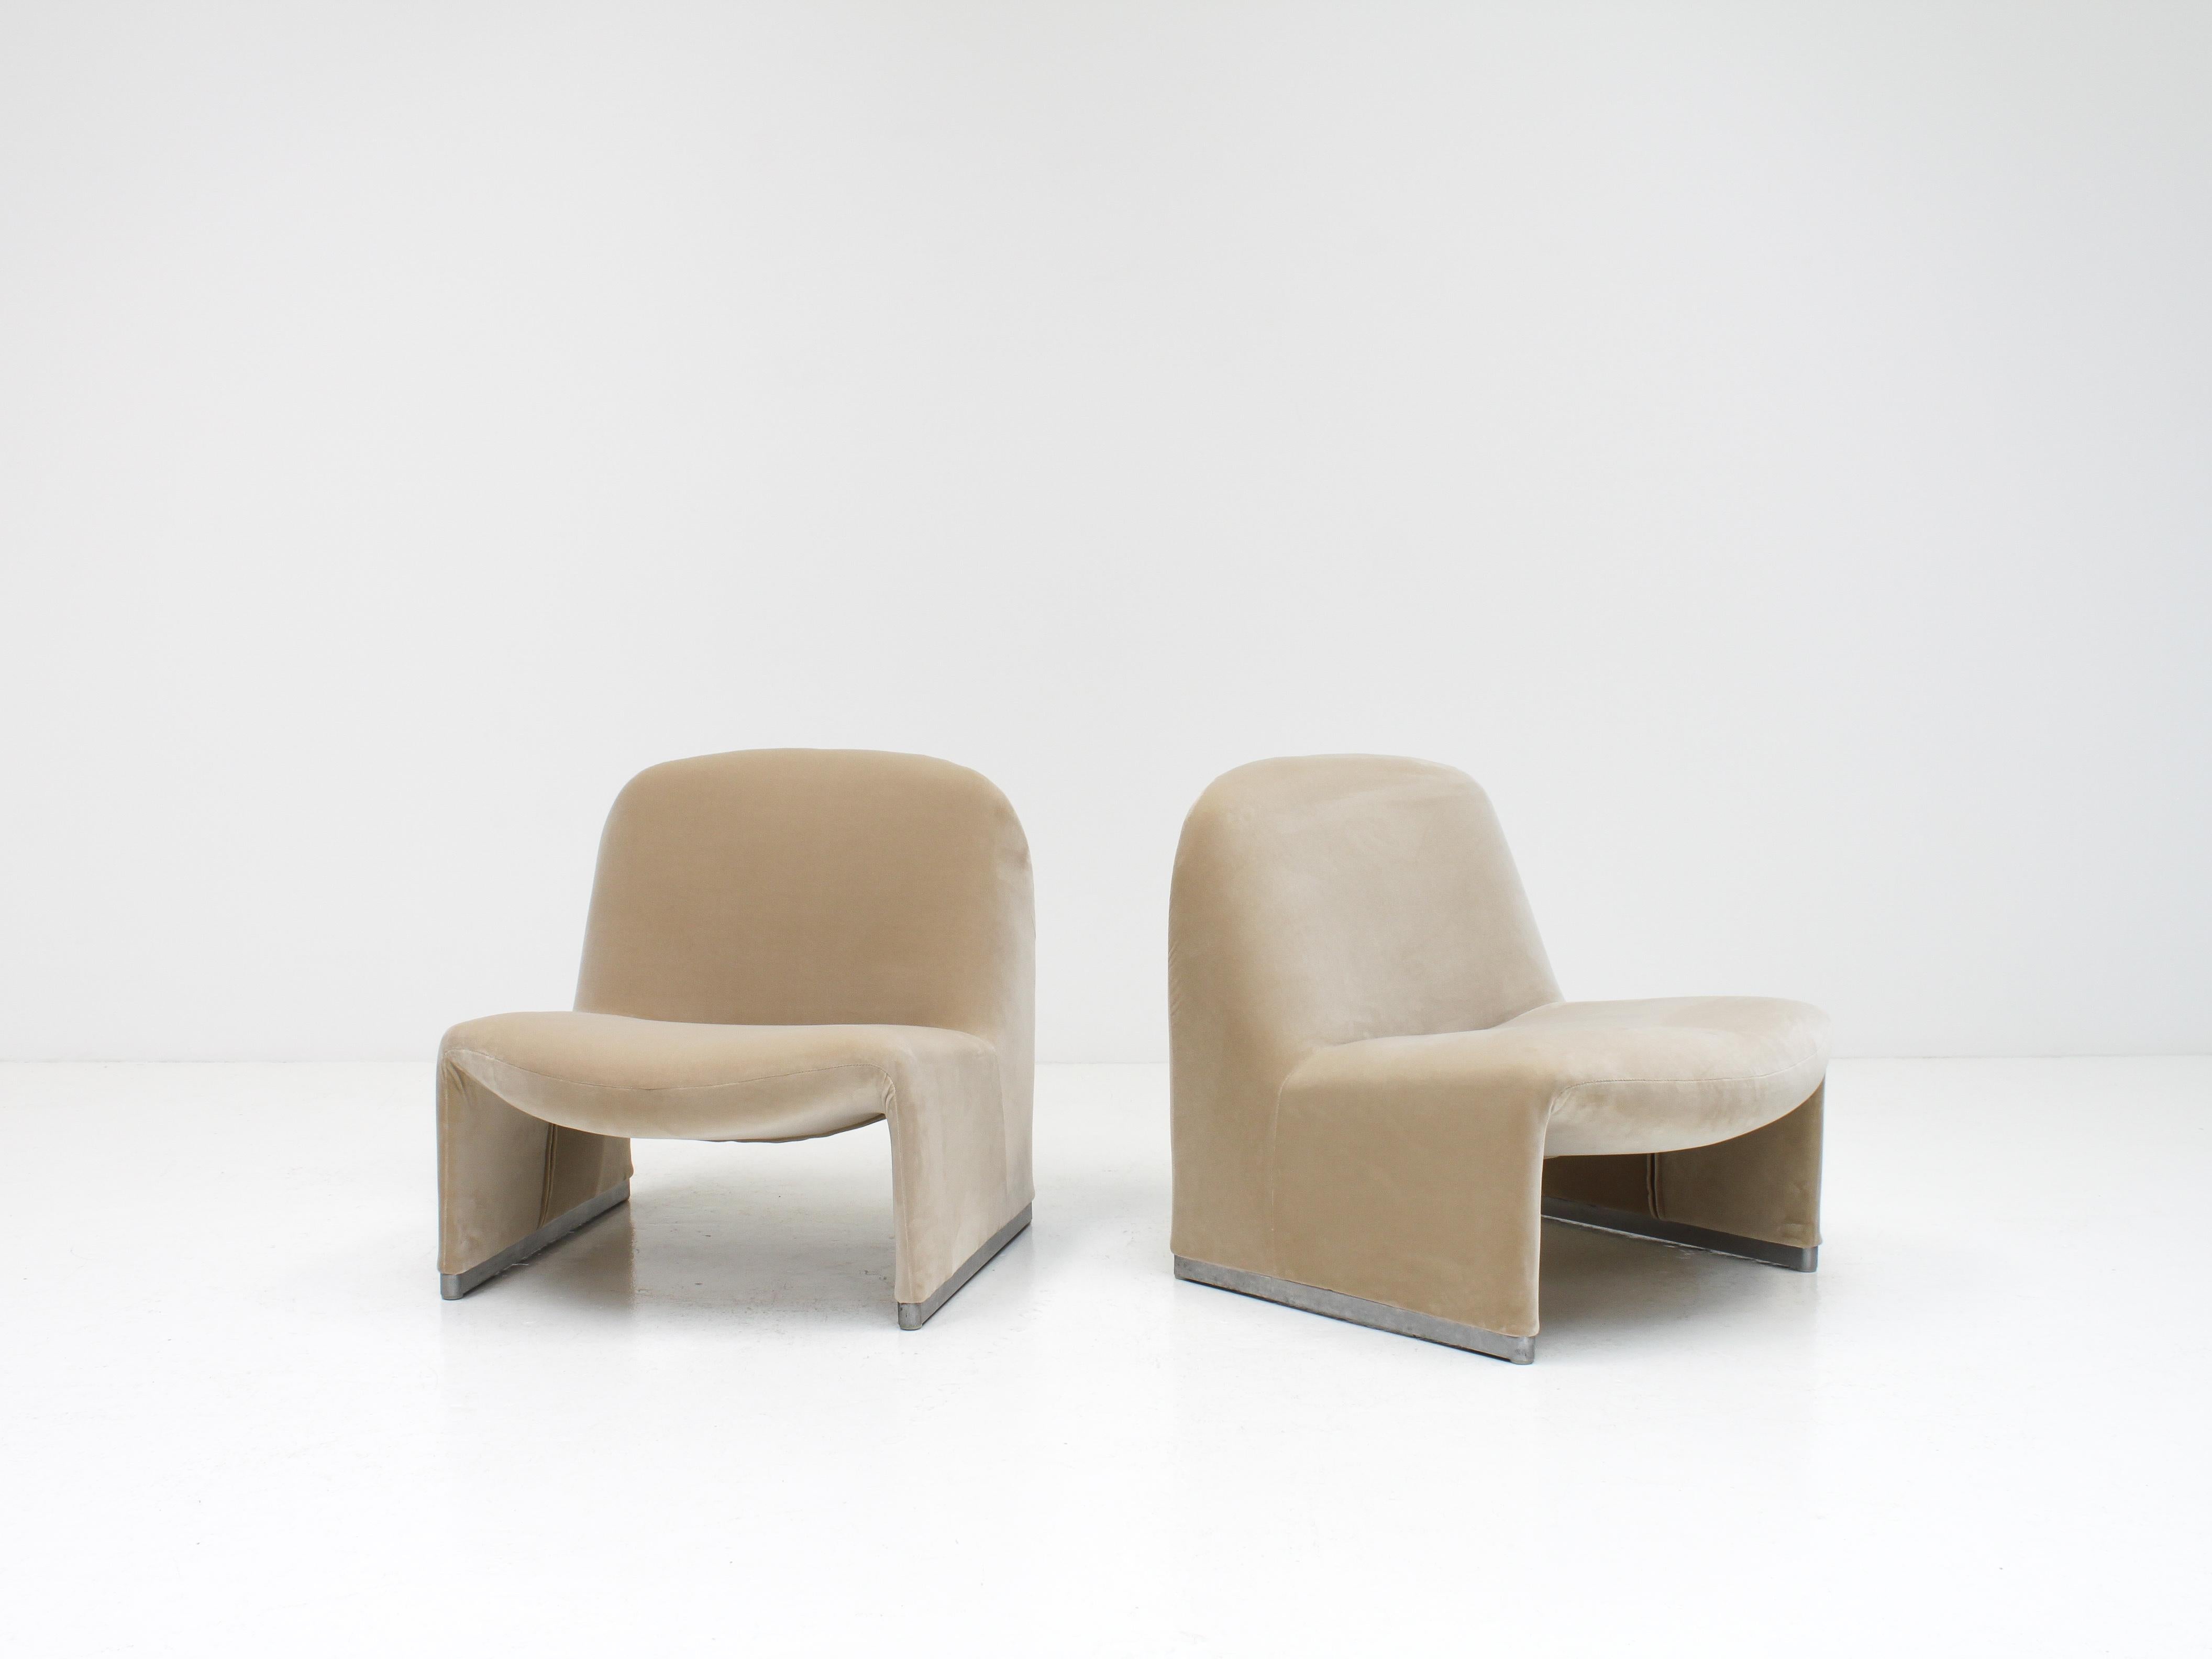 Giancarlo Piretti “Alky” Chairs in New Velvet, Artifort, 1970s - *Customizable* For Sale 1